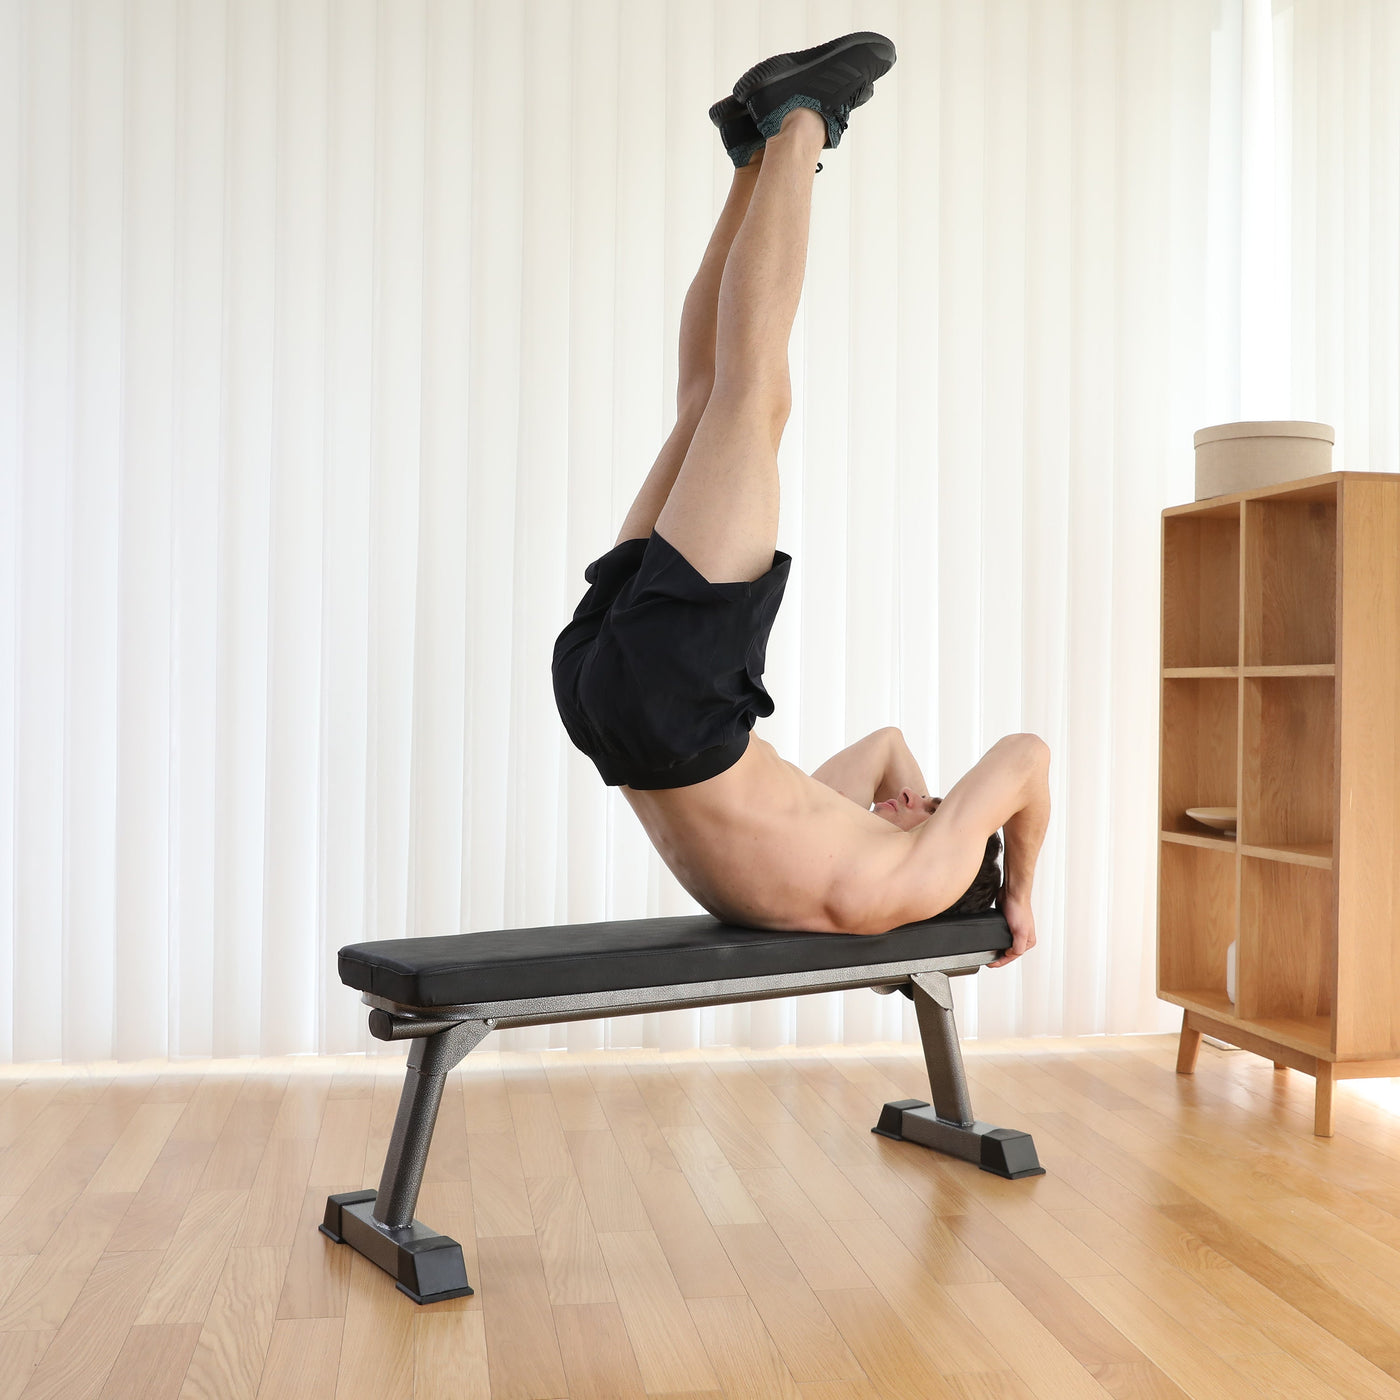 Foldable Flat Bench for Weight Training and Ab Exercises by Finer Form